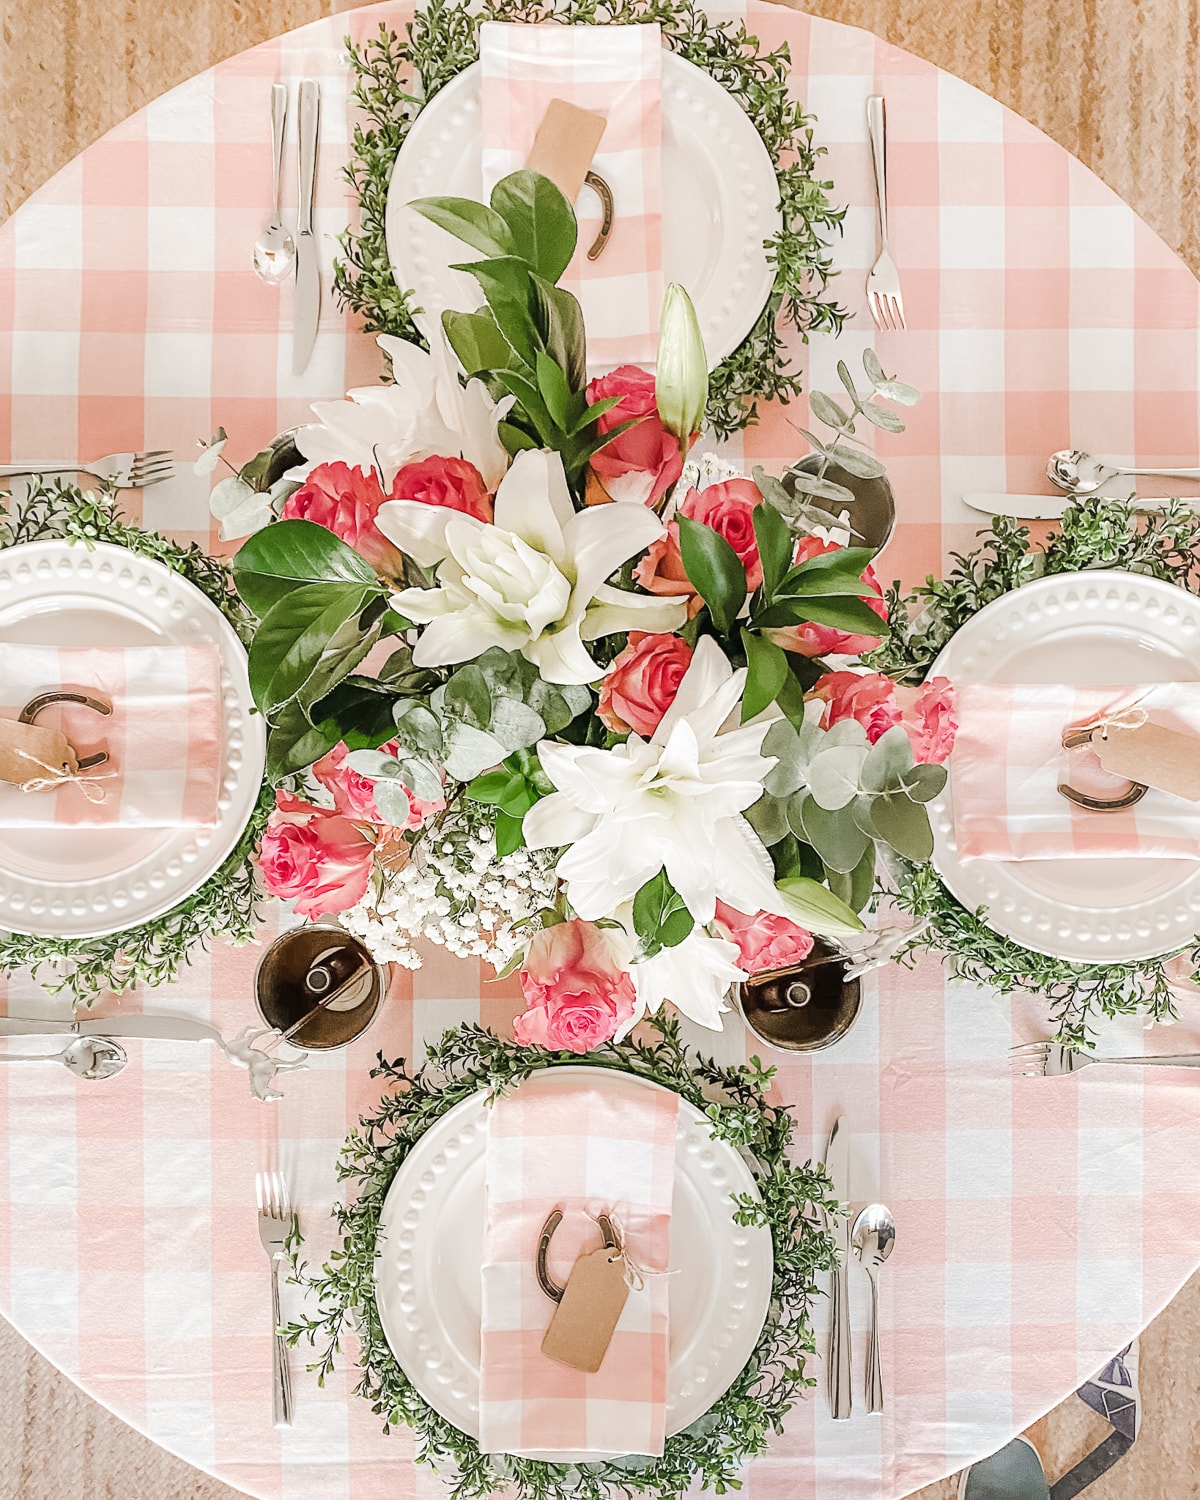 Race day table decorations and race day party ideas by entertaining blogger Stephanie Ziajka on Diary of a Debutante